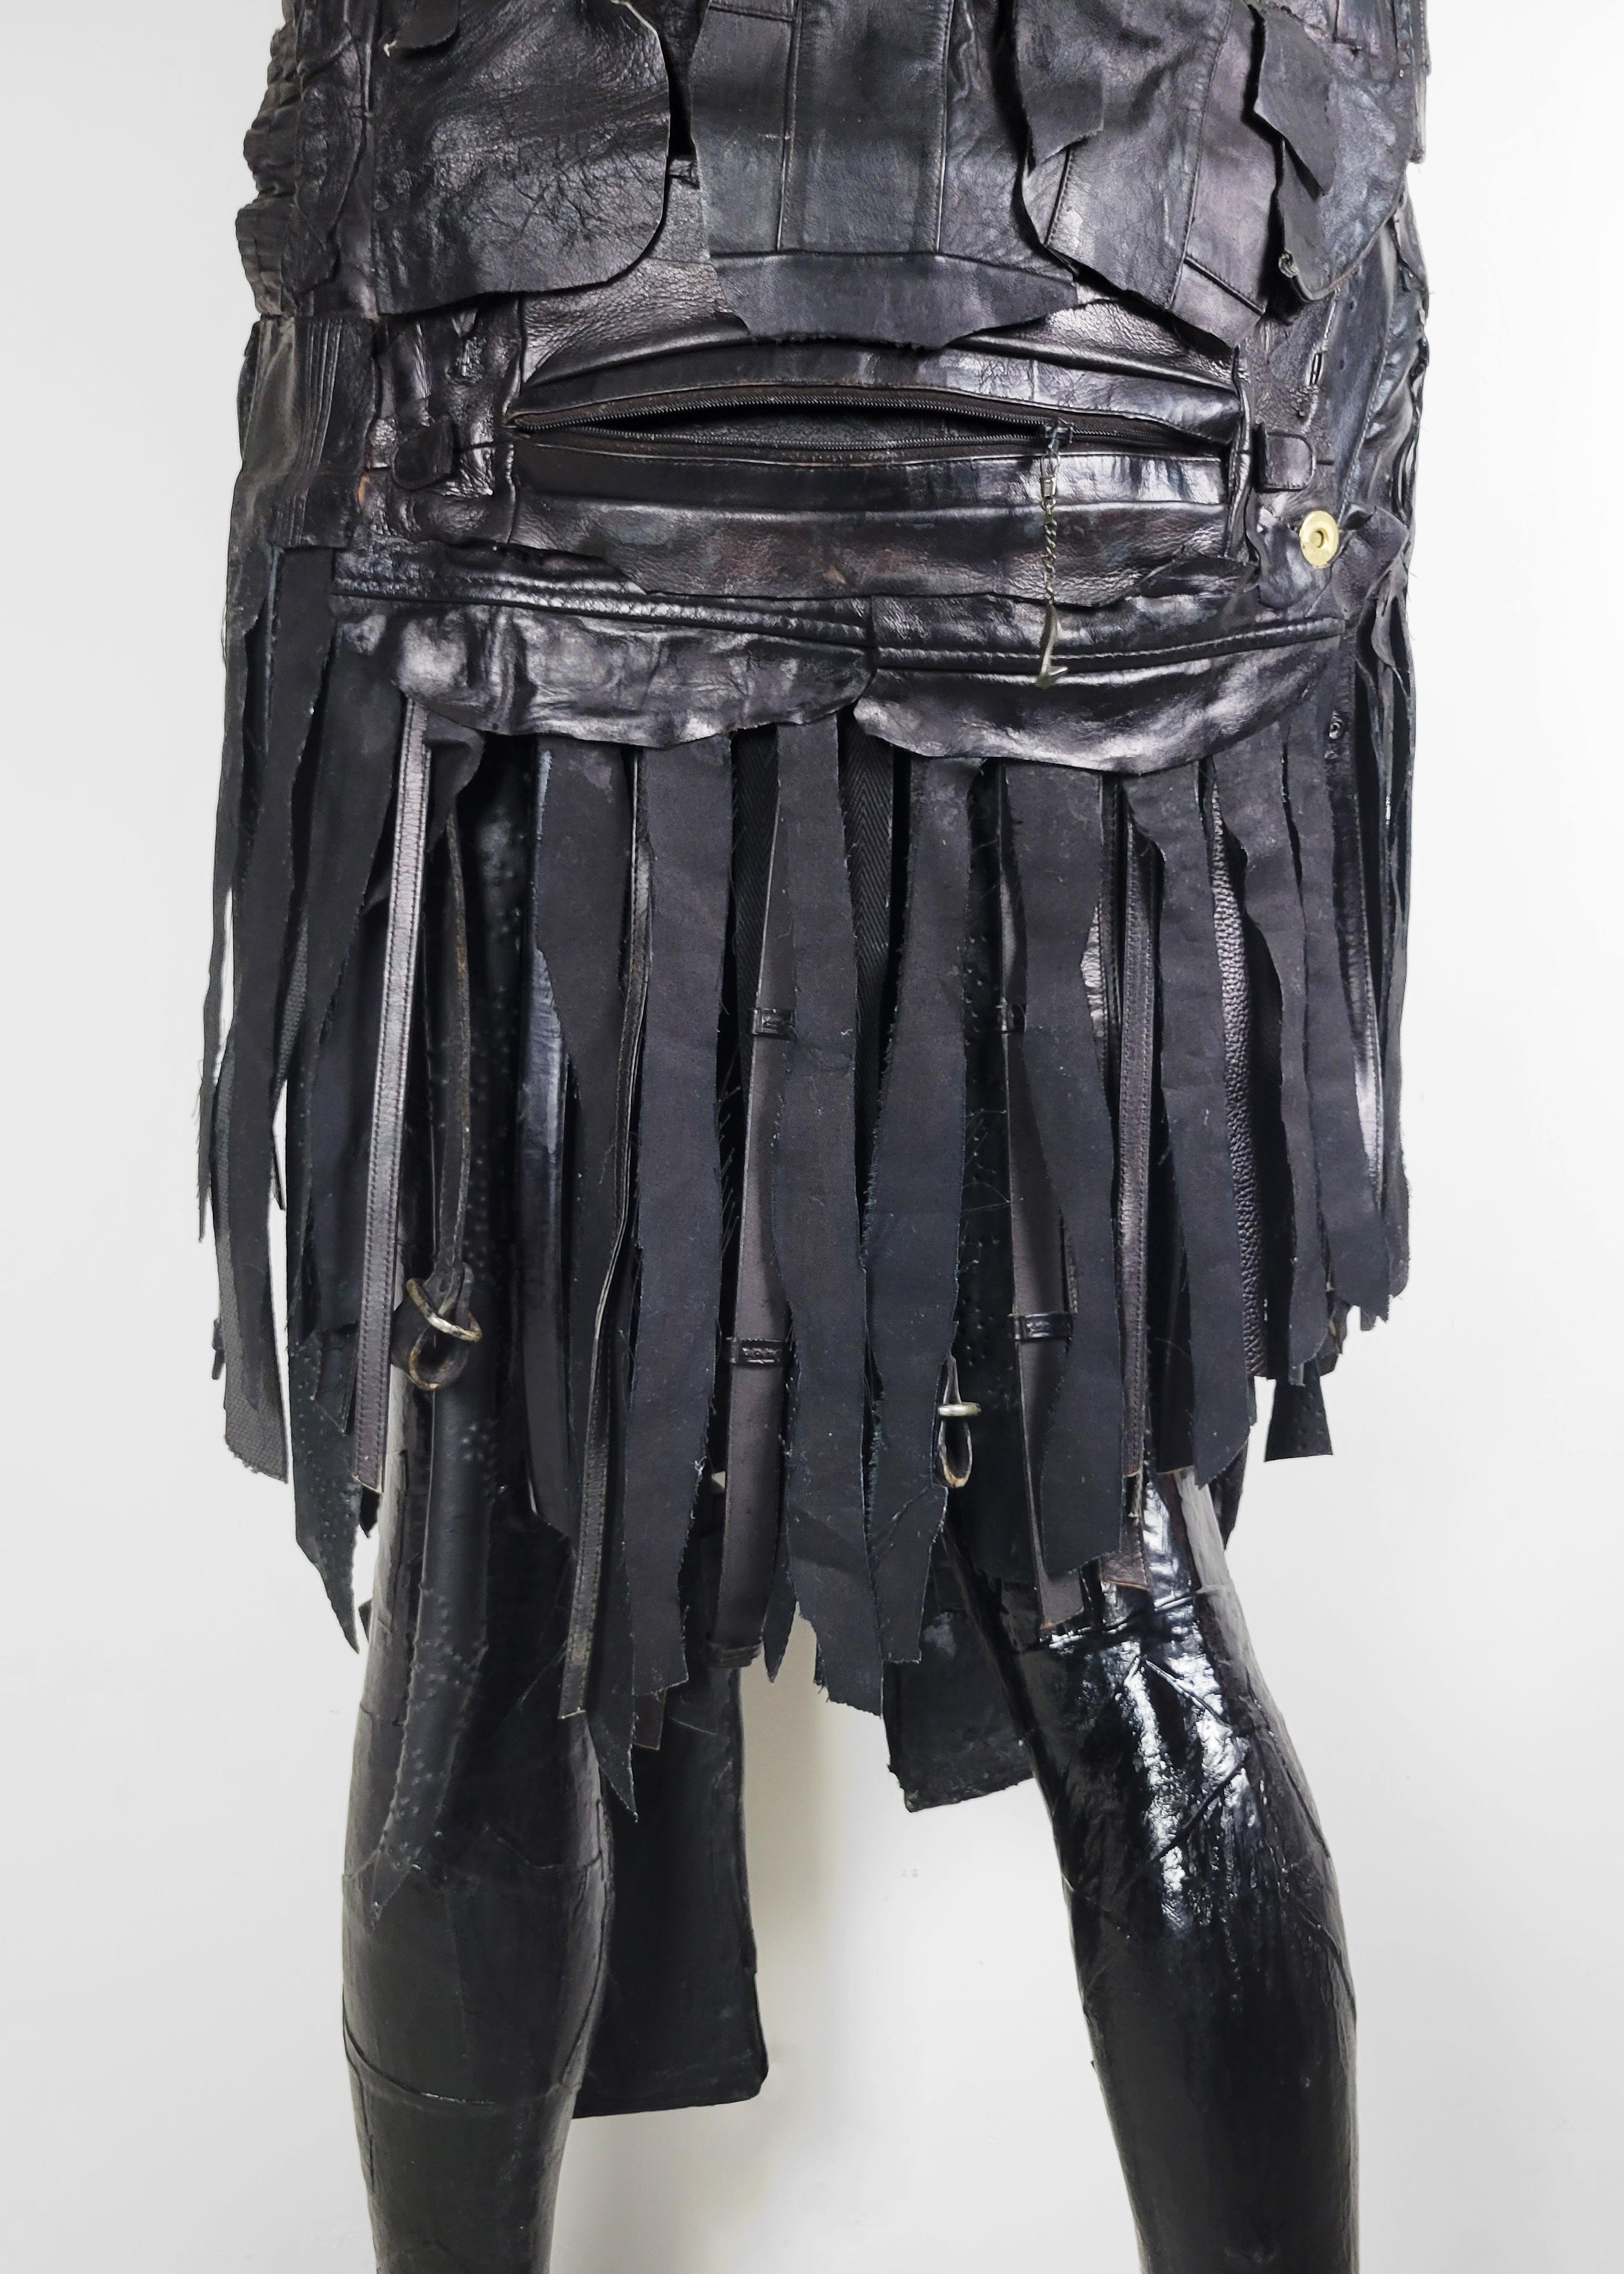 Linda Stein, Tough Love 683 - Contemporary Mixed Media Fashion Leather Sculpture For Sale 2